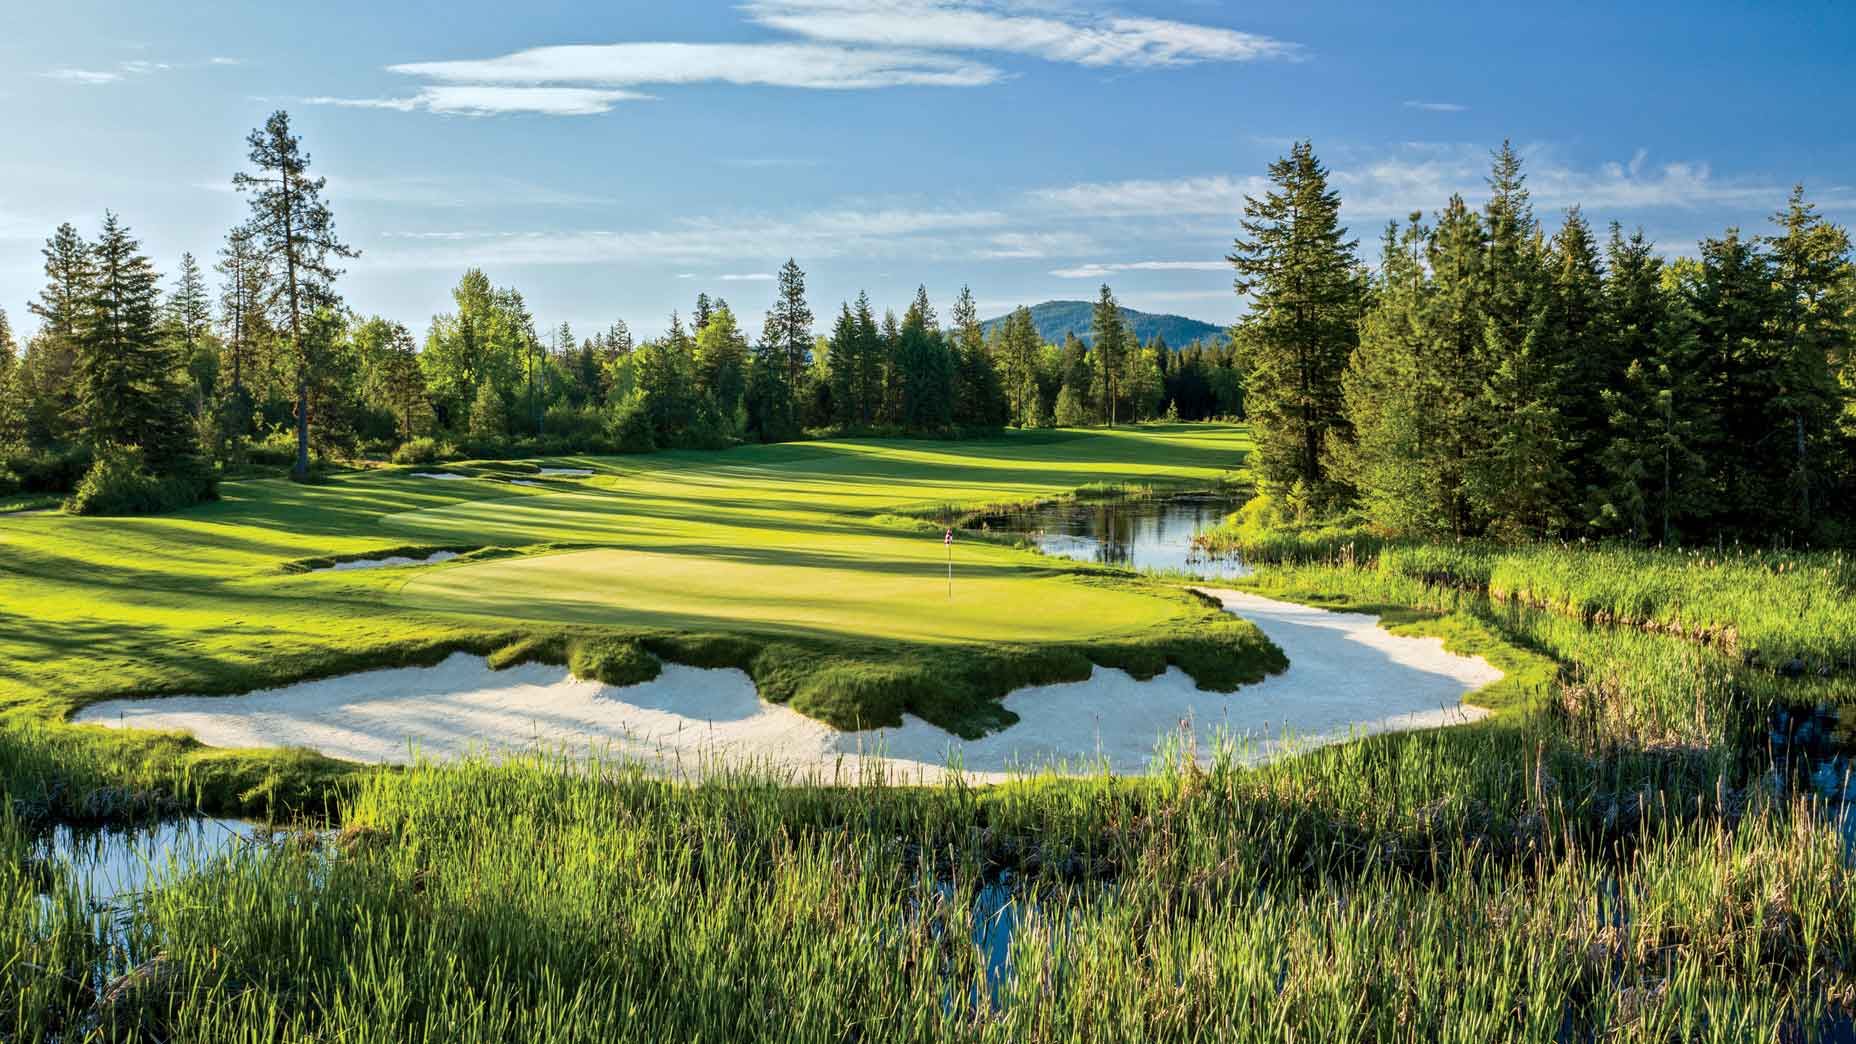 Best golf courses in Idaho, according to GOLF Magazine’s expert course raters